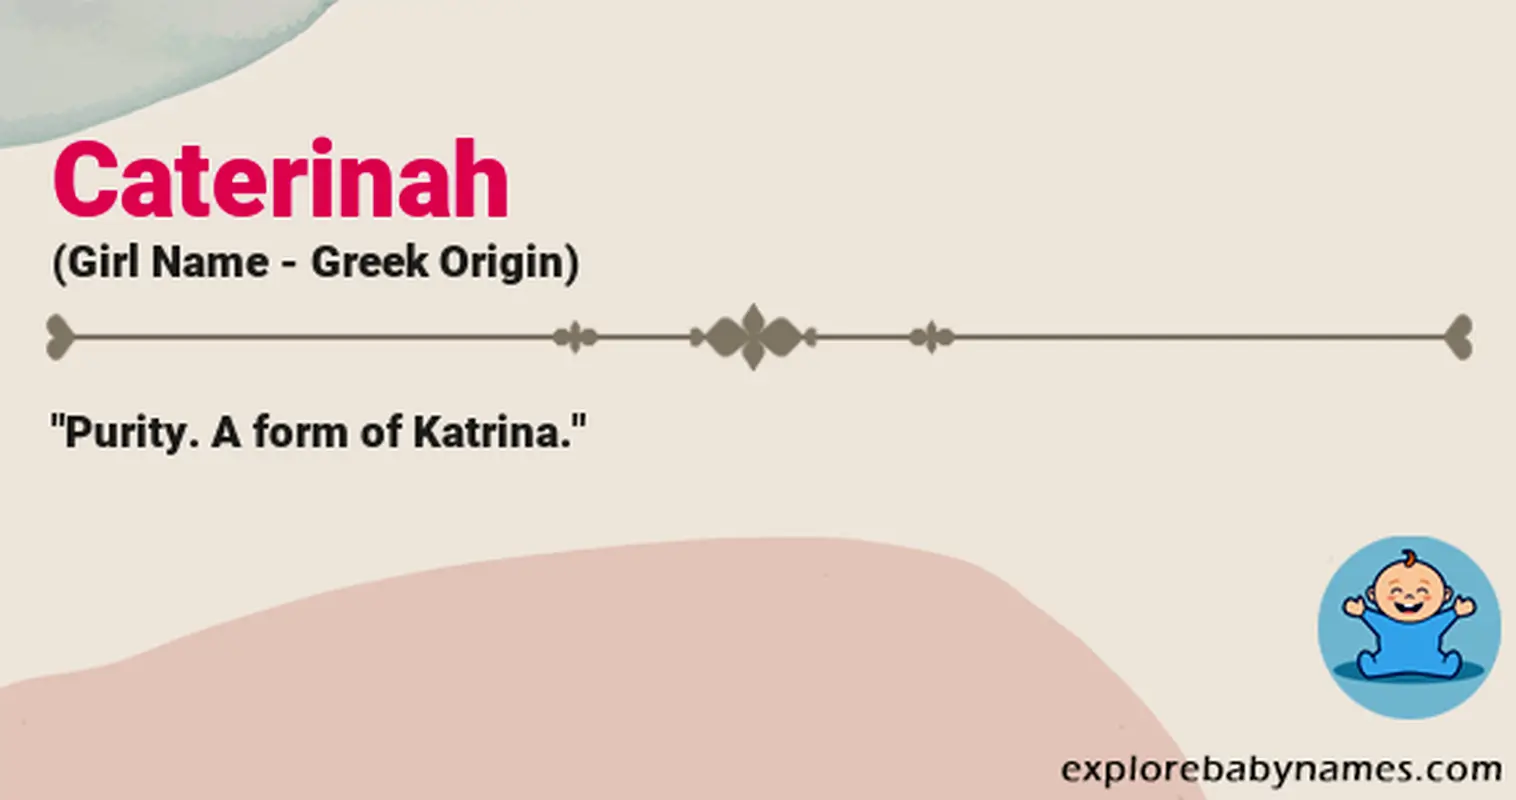 Meaning of Caterinah